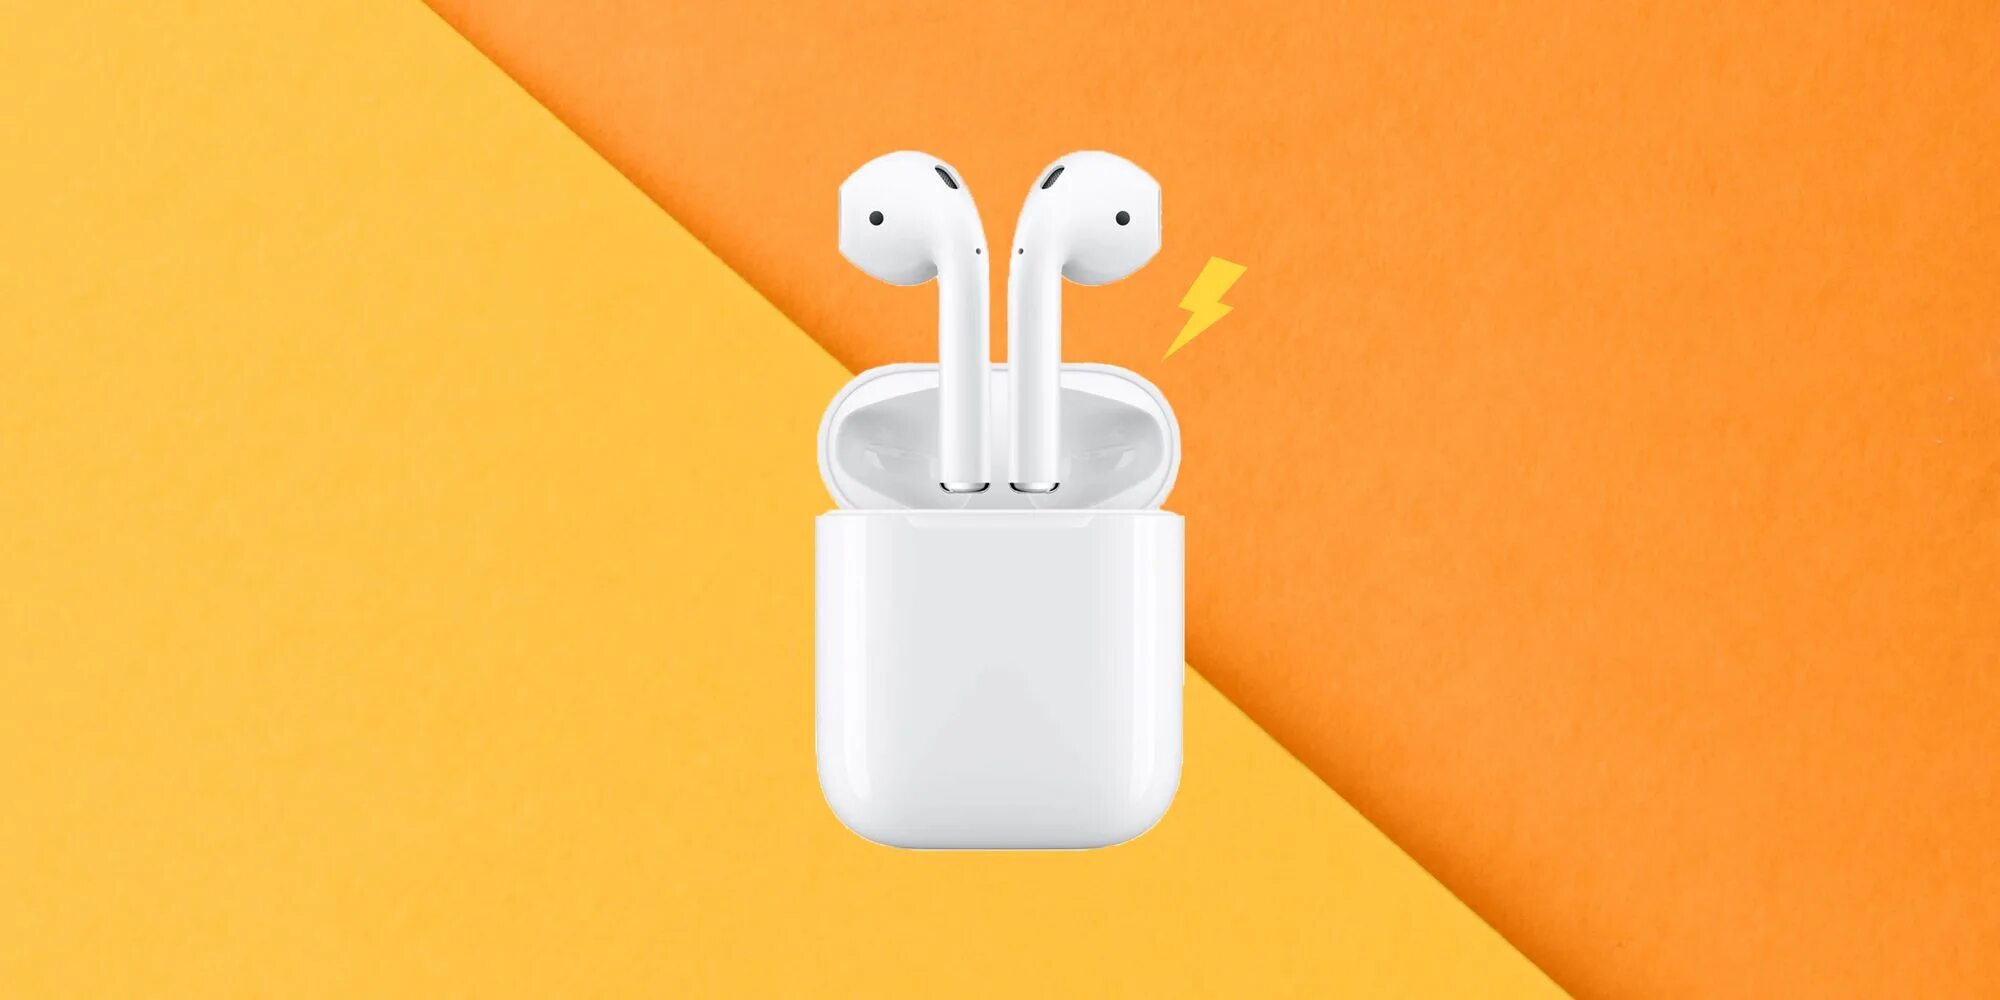 A2564 airpods. Air pods 2. Наушники AIRPODS 3. AIRPODS 2.2 Post. AIRPODS 3 на белом фоне.